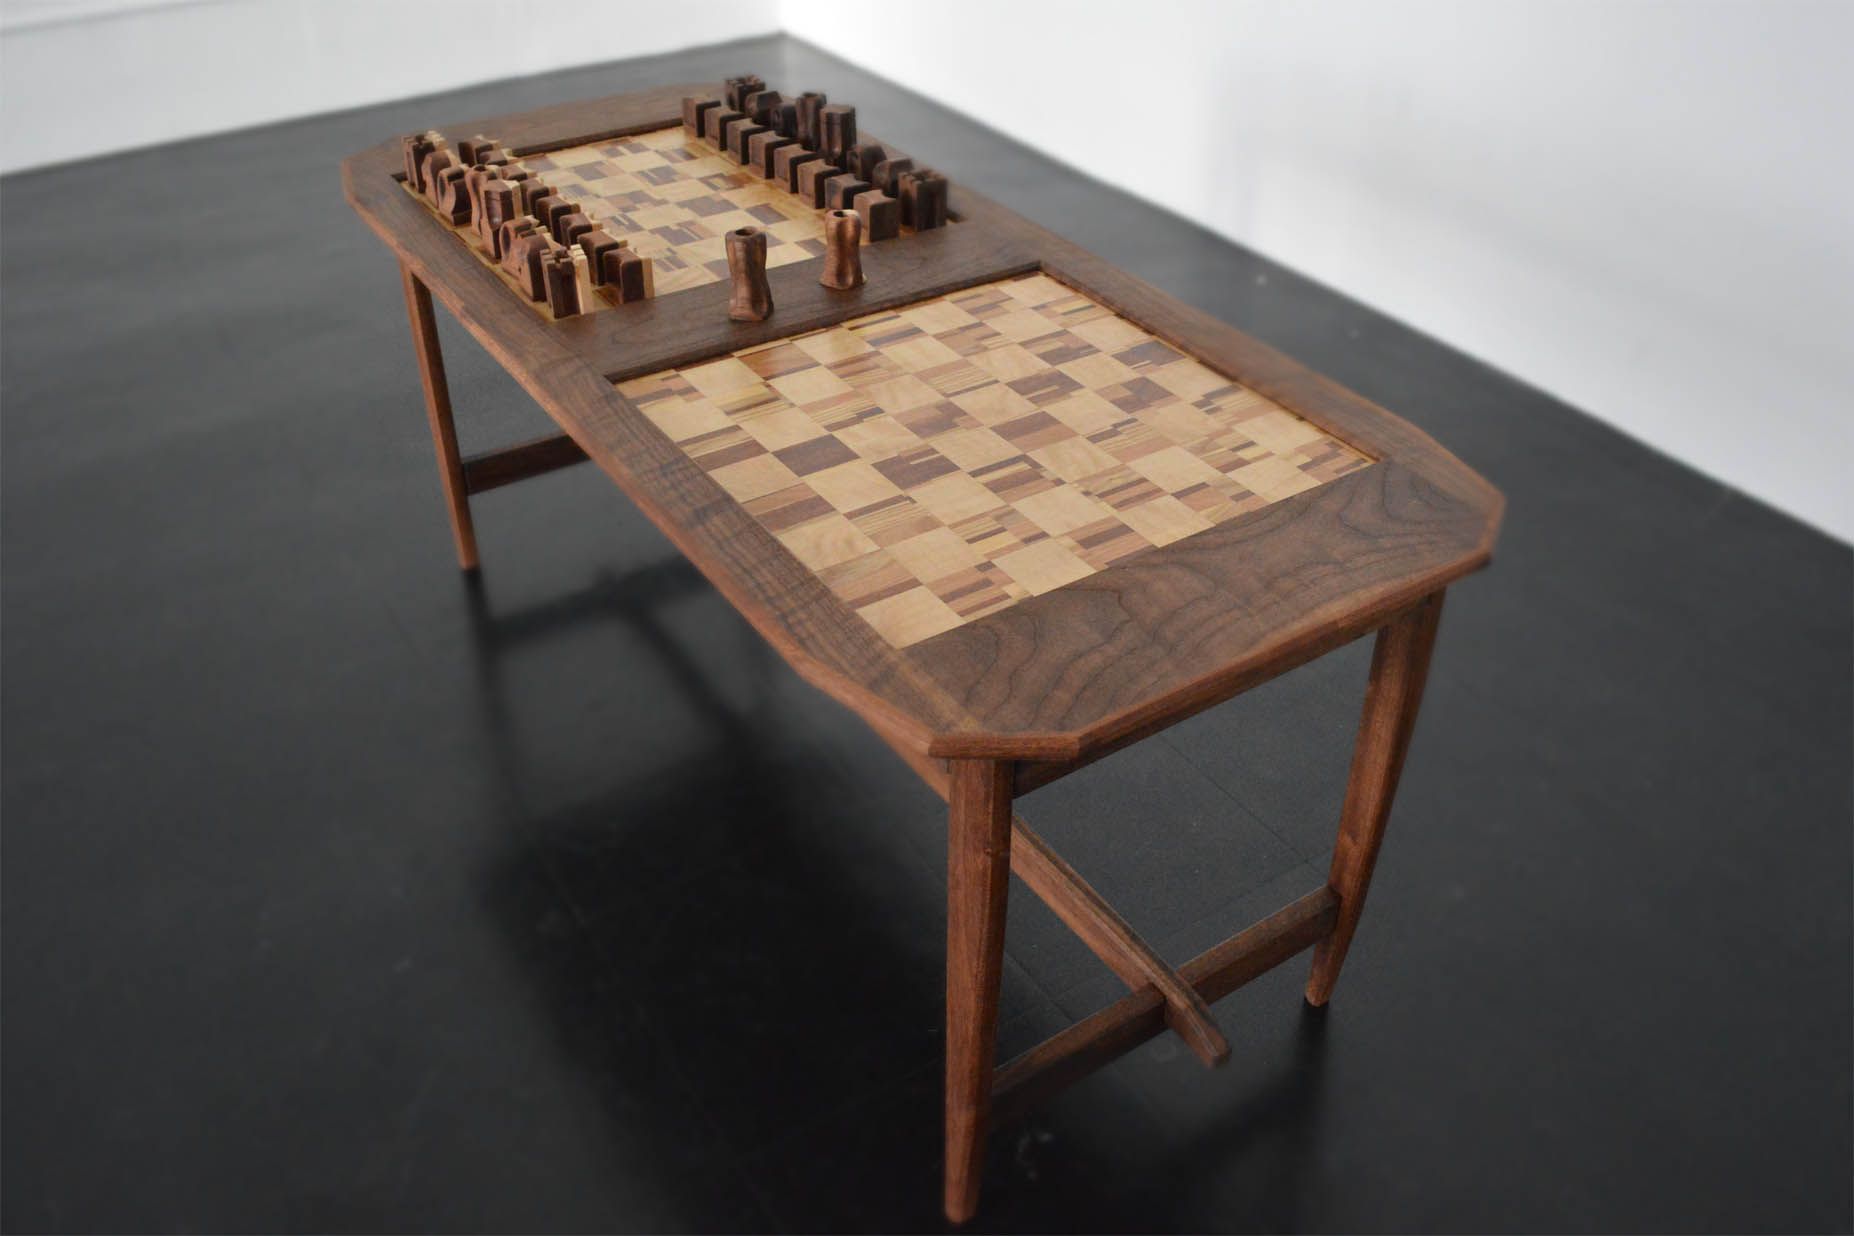 Hand Made Coffee Table Featuring A Double Chess Board By Keep Furniture Custommadecom